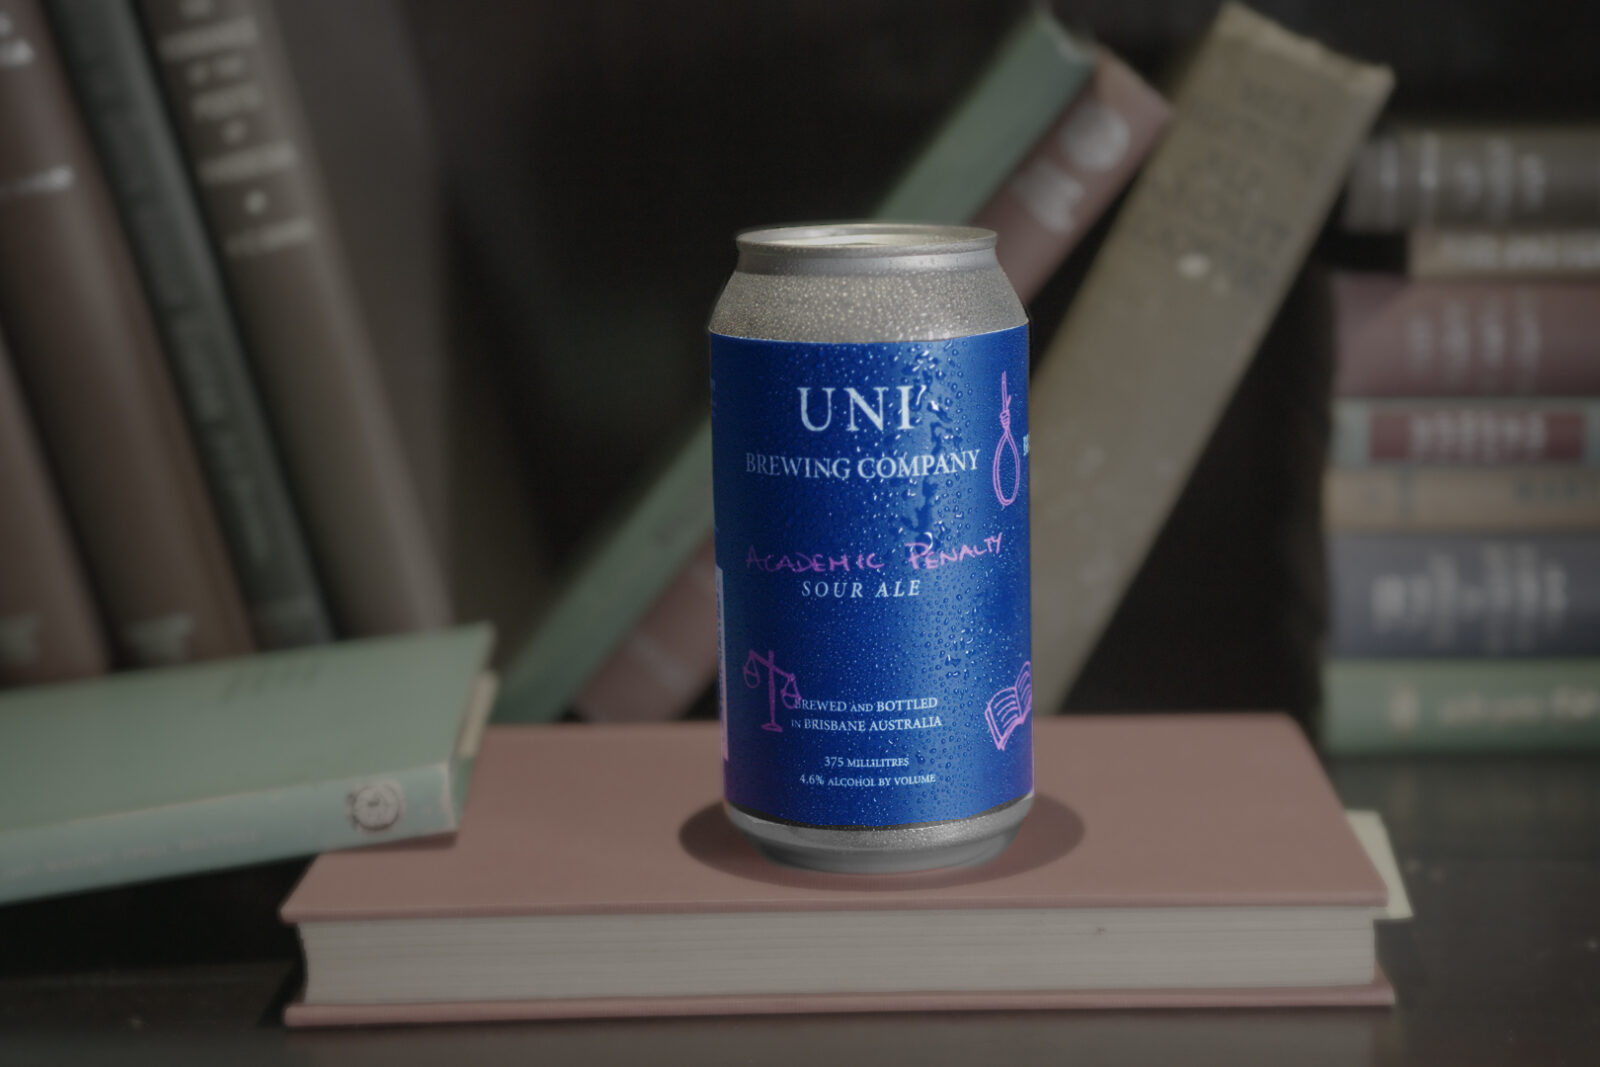 Uni Brewing Company Academic Penatly Sour Ale beer can on a bookshelf.